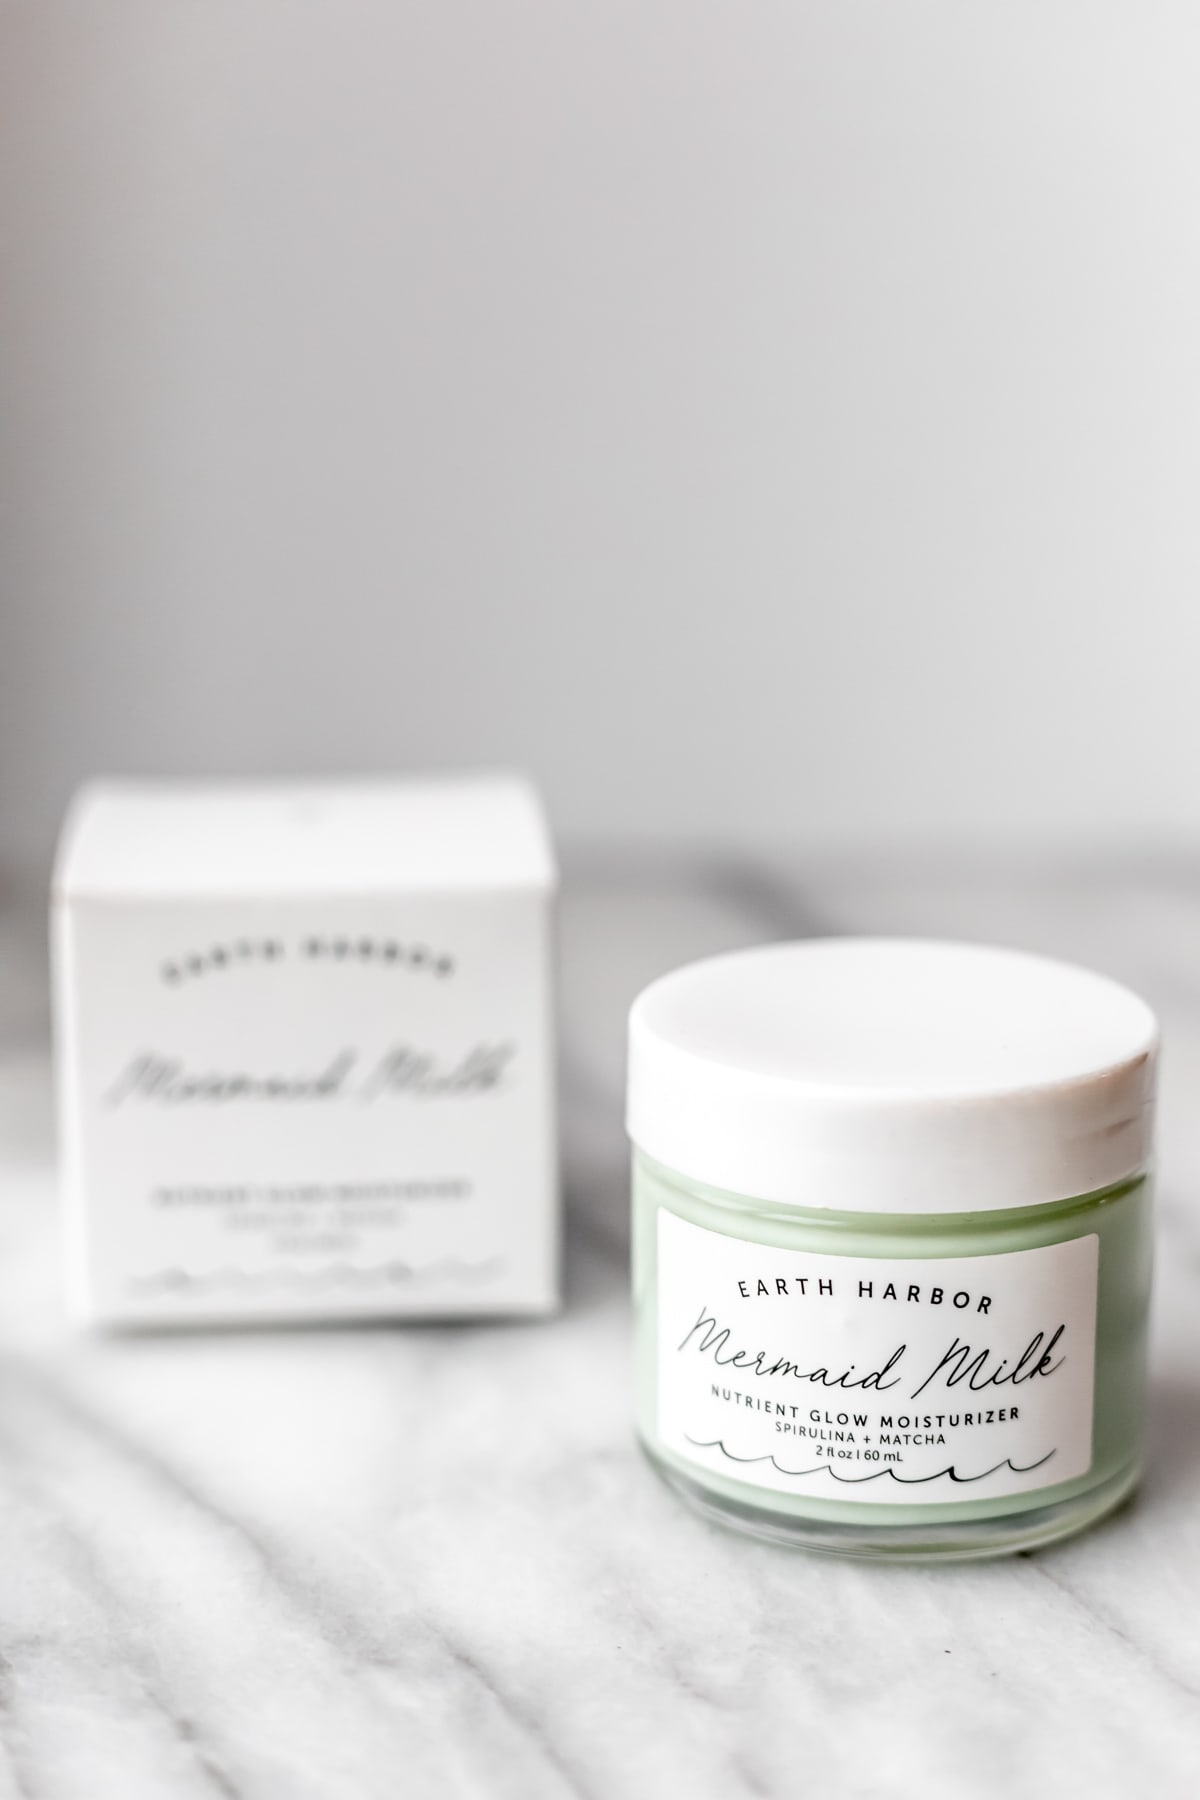 A jar and the box it comes in for Earth Harbor Mermaid Milk nutrient glow. moisturizer on a marble background.